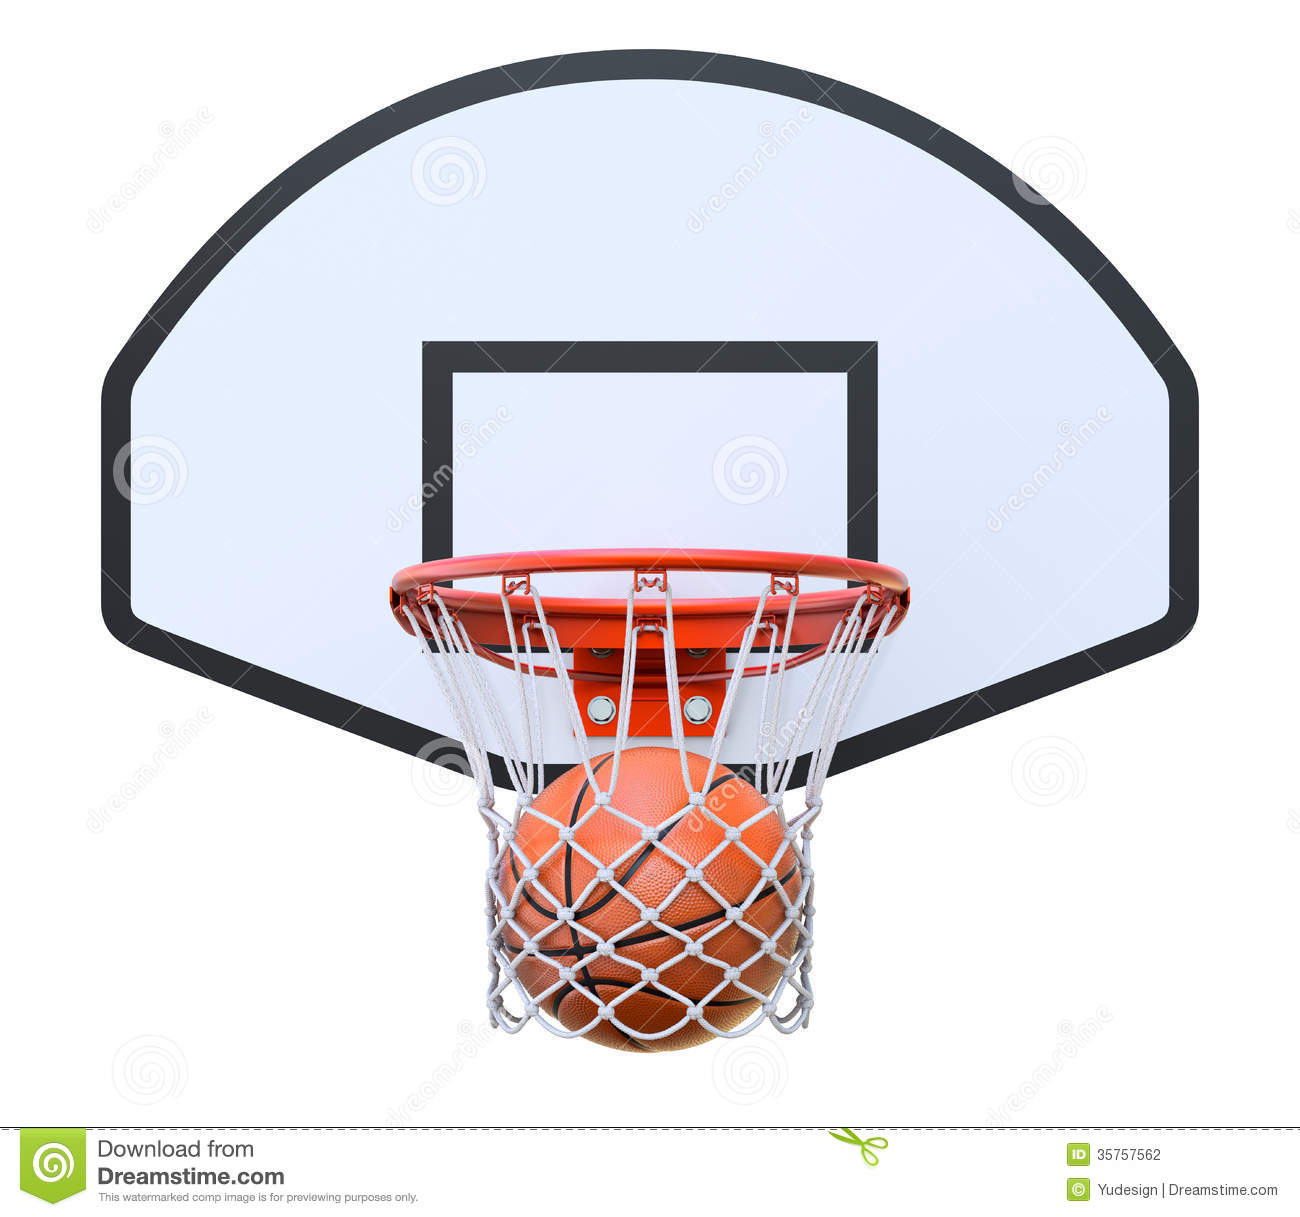 Basketball Hoop Backboard Clipart | Clipart library - Free Clipart 